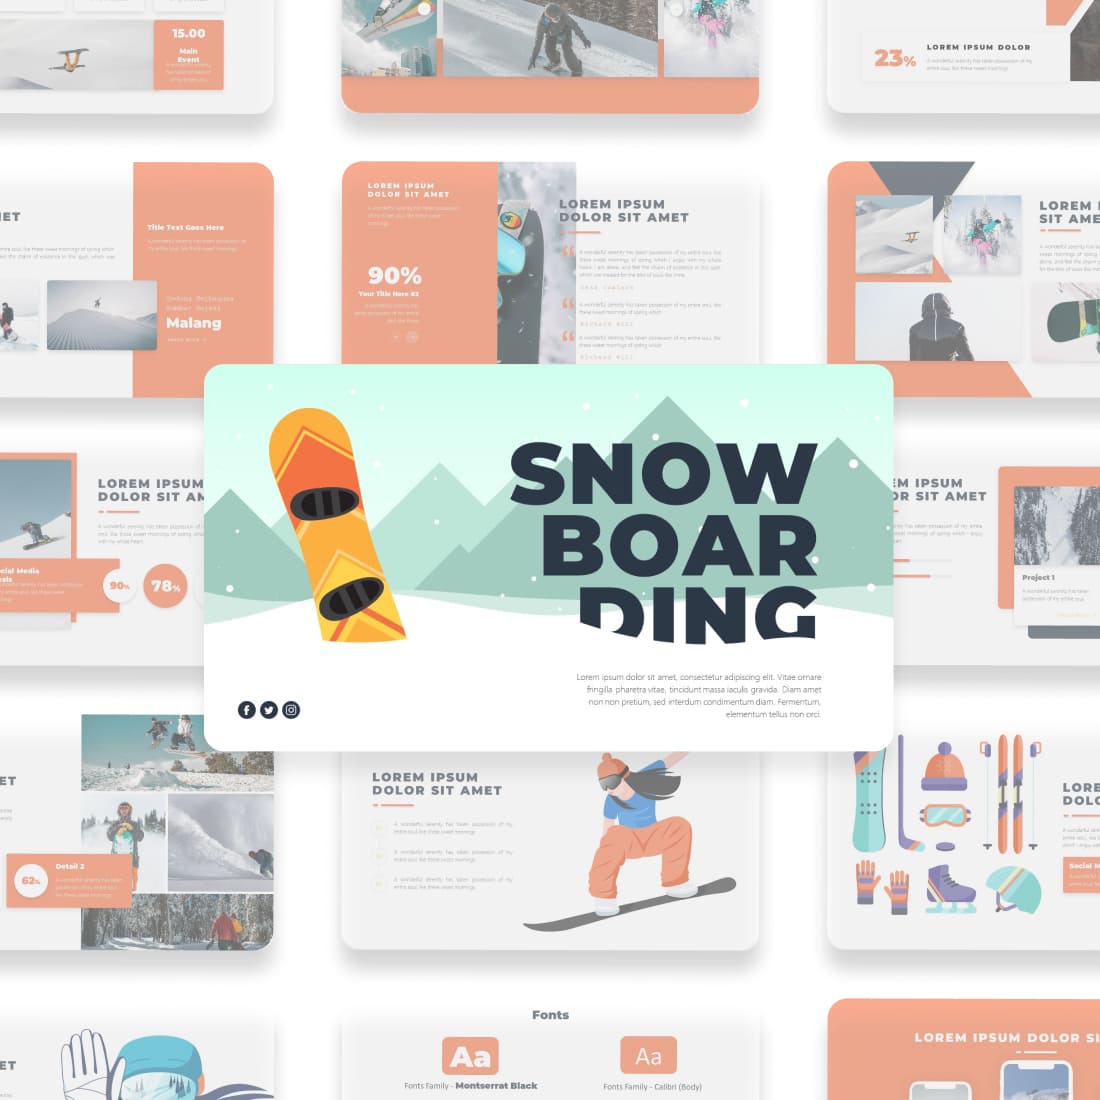 Snowboarding Powerpoint Template cover.